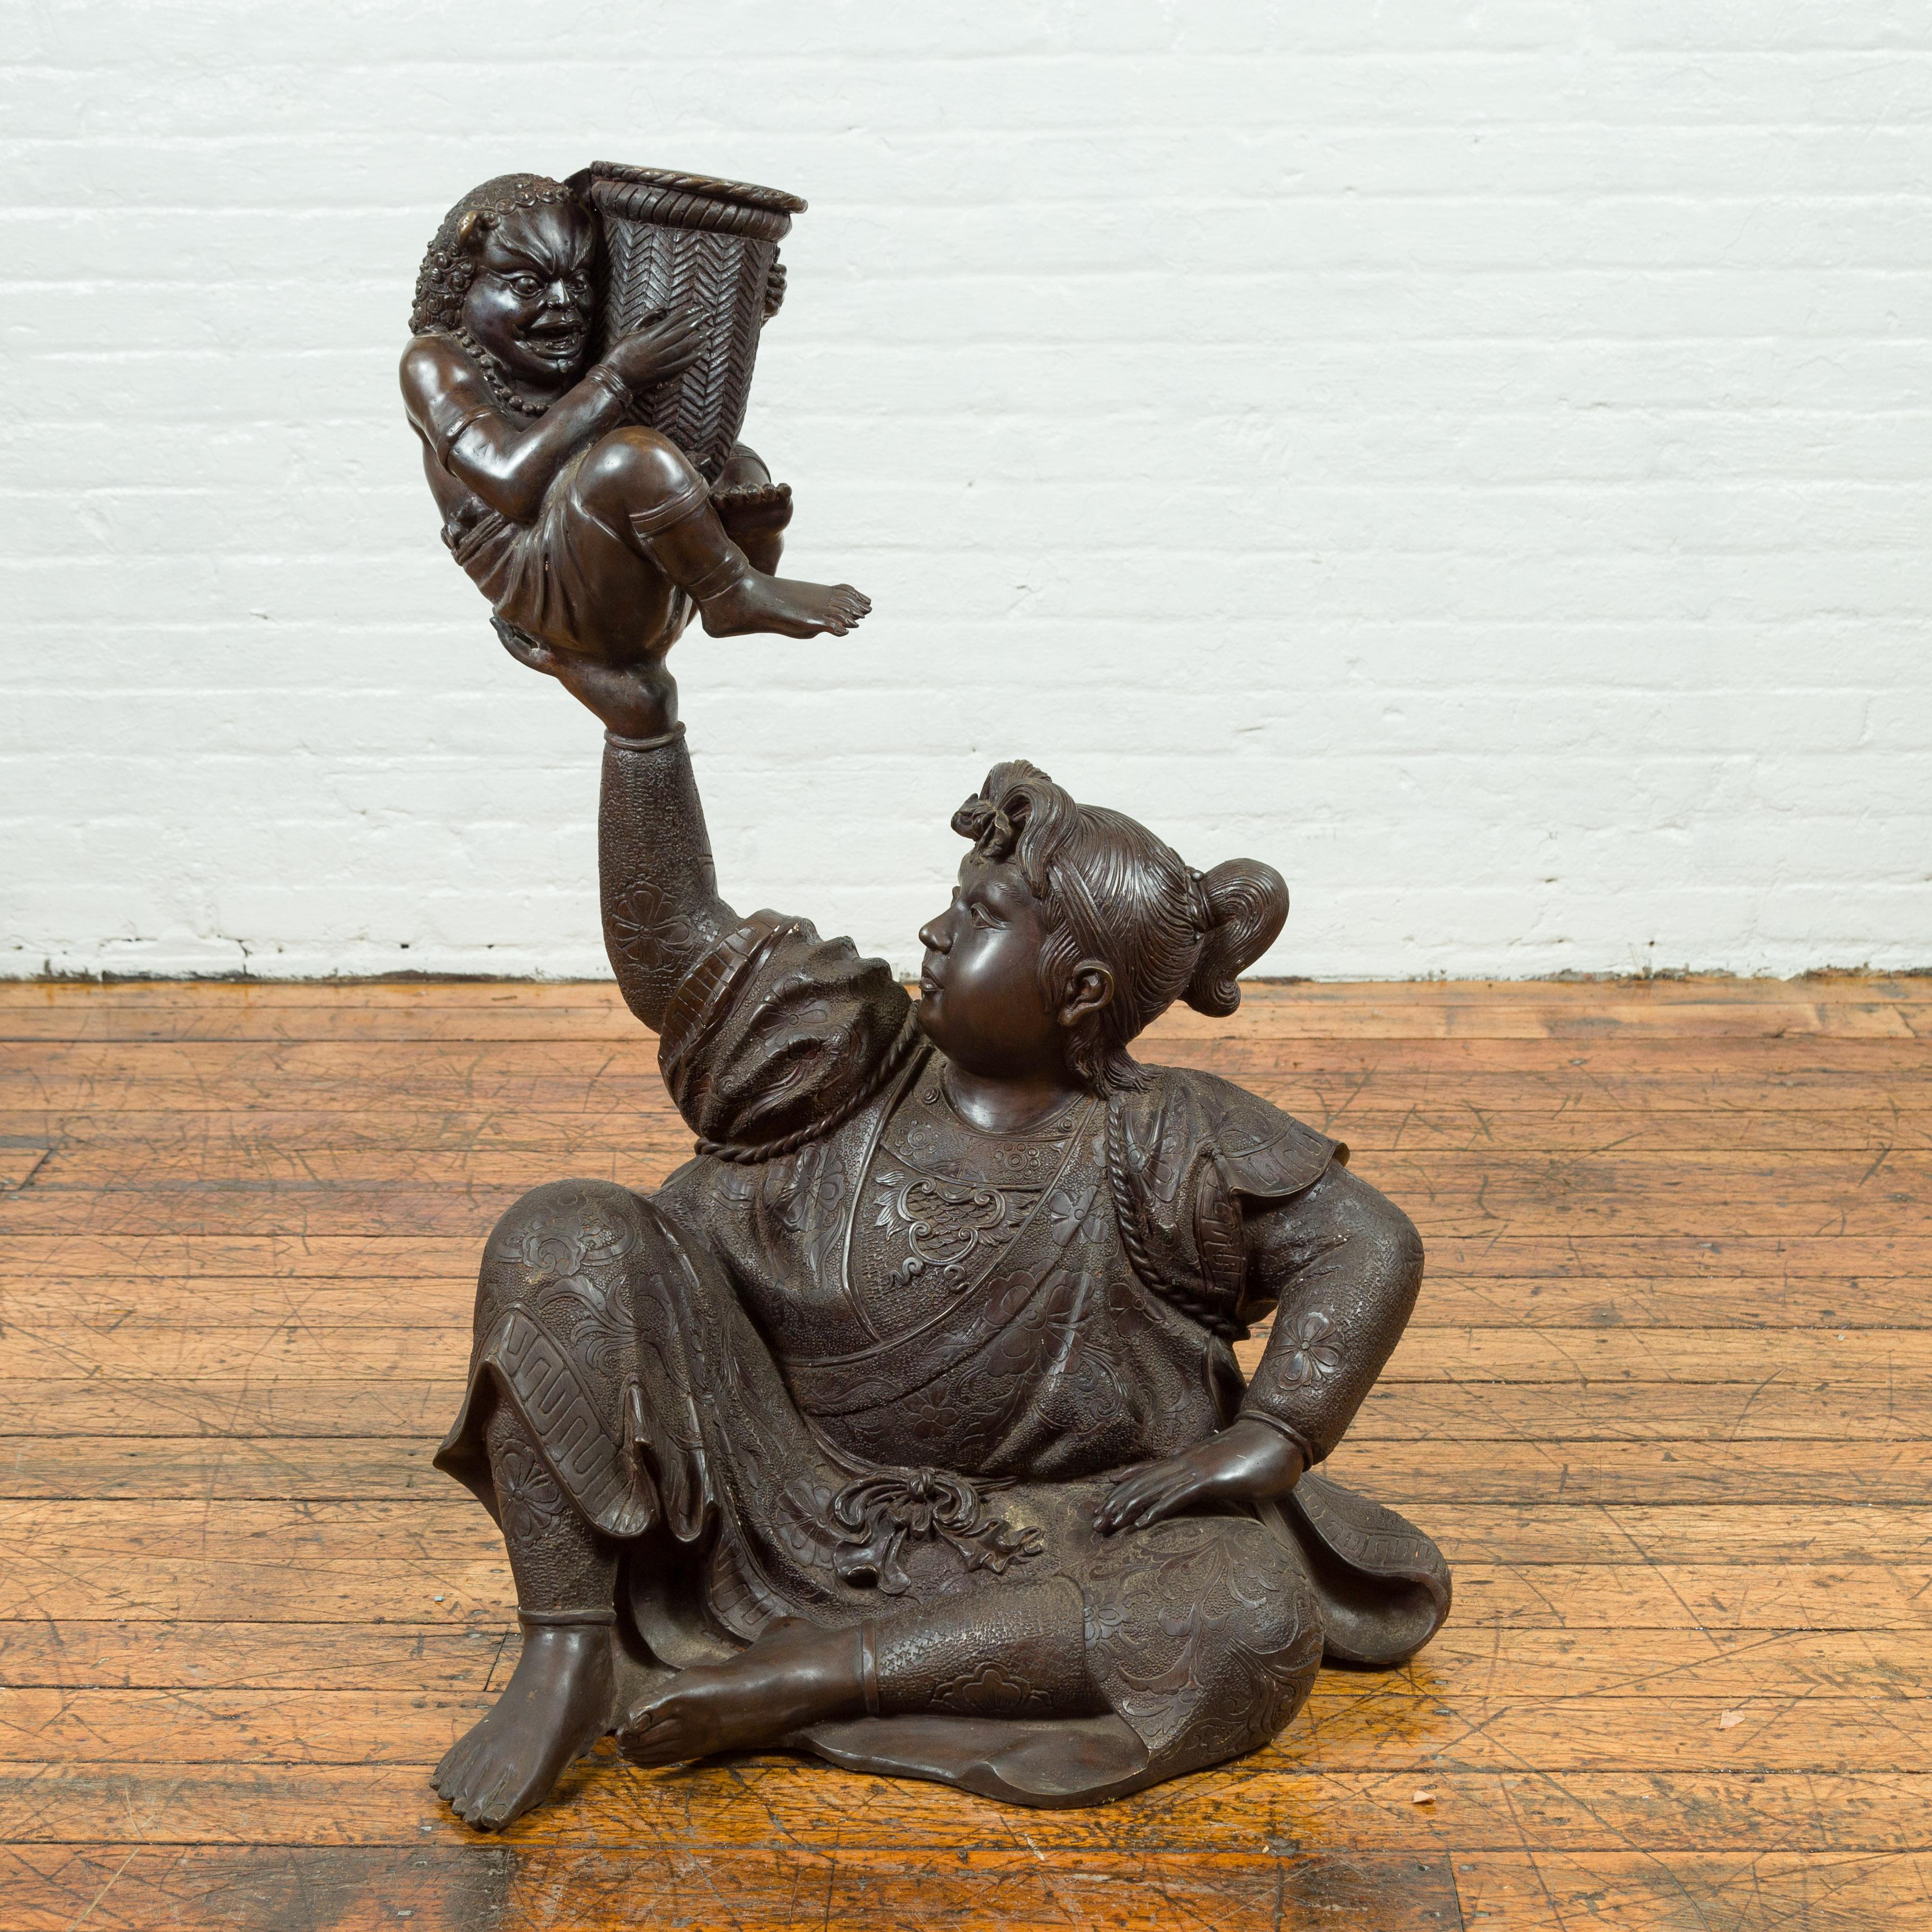 A Japanese style bronze sculpture from the 20th century, depicting a woman holding a mythical creature with rattan basket. Created with the traditional technique of the lost-wax (à la cire perdue) that allows a great precision and finesse in the